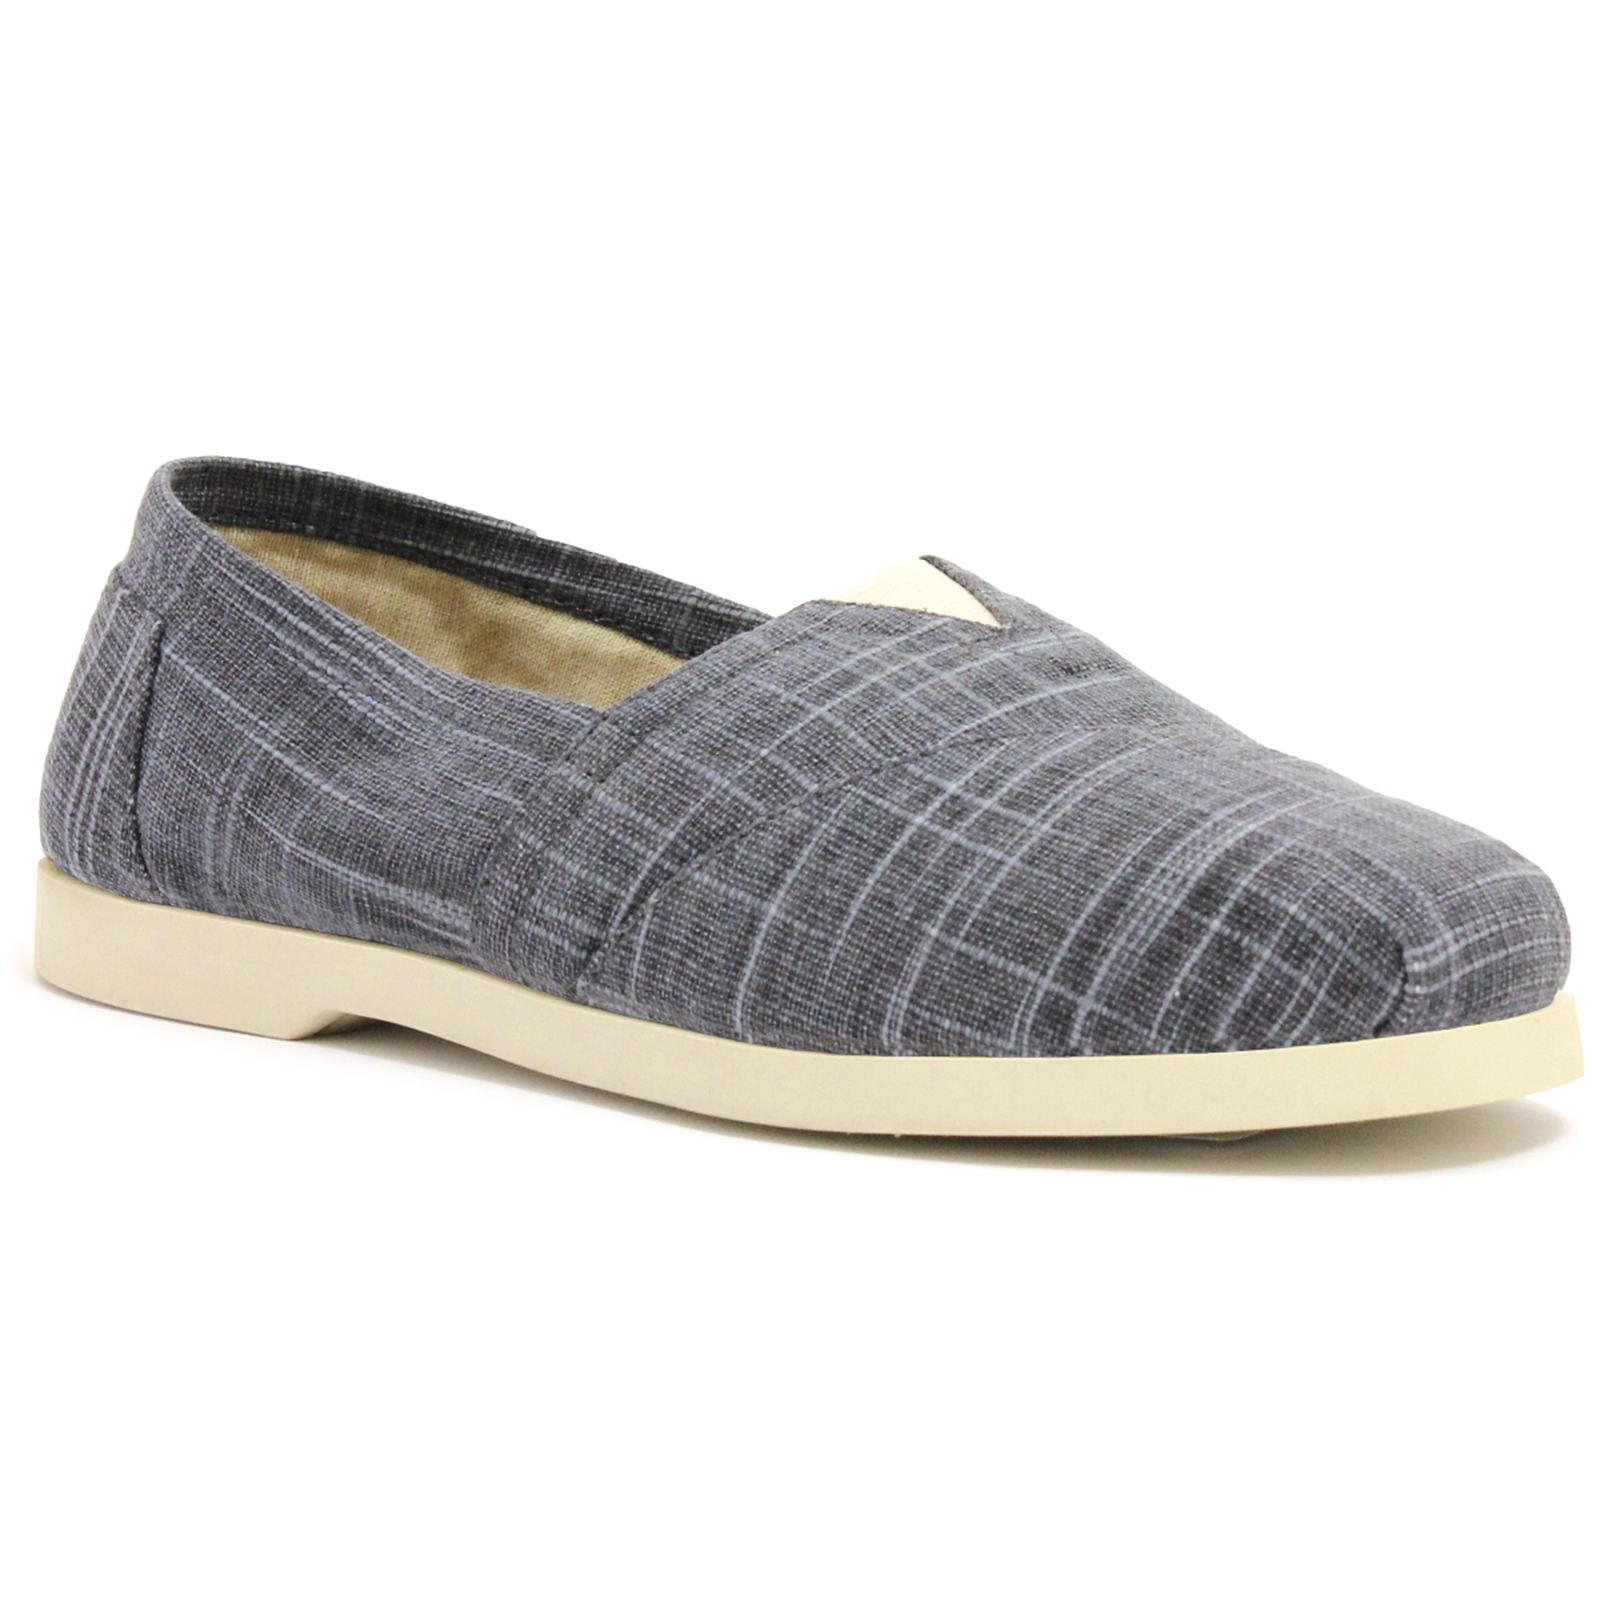 Women's 100% leather Comfort-Arch Navy shoe